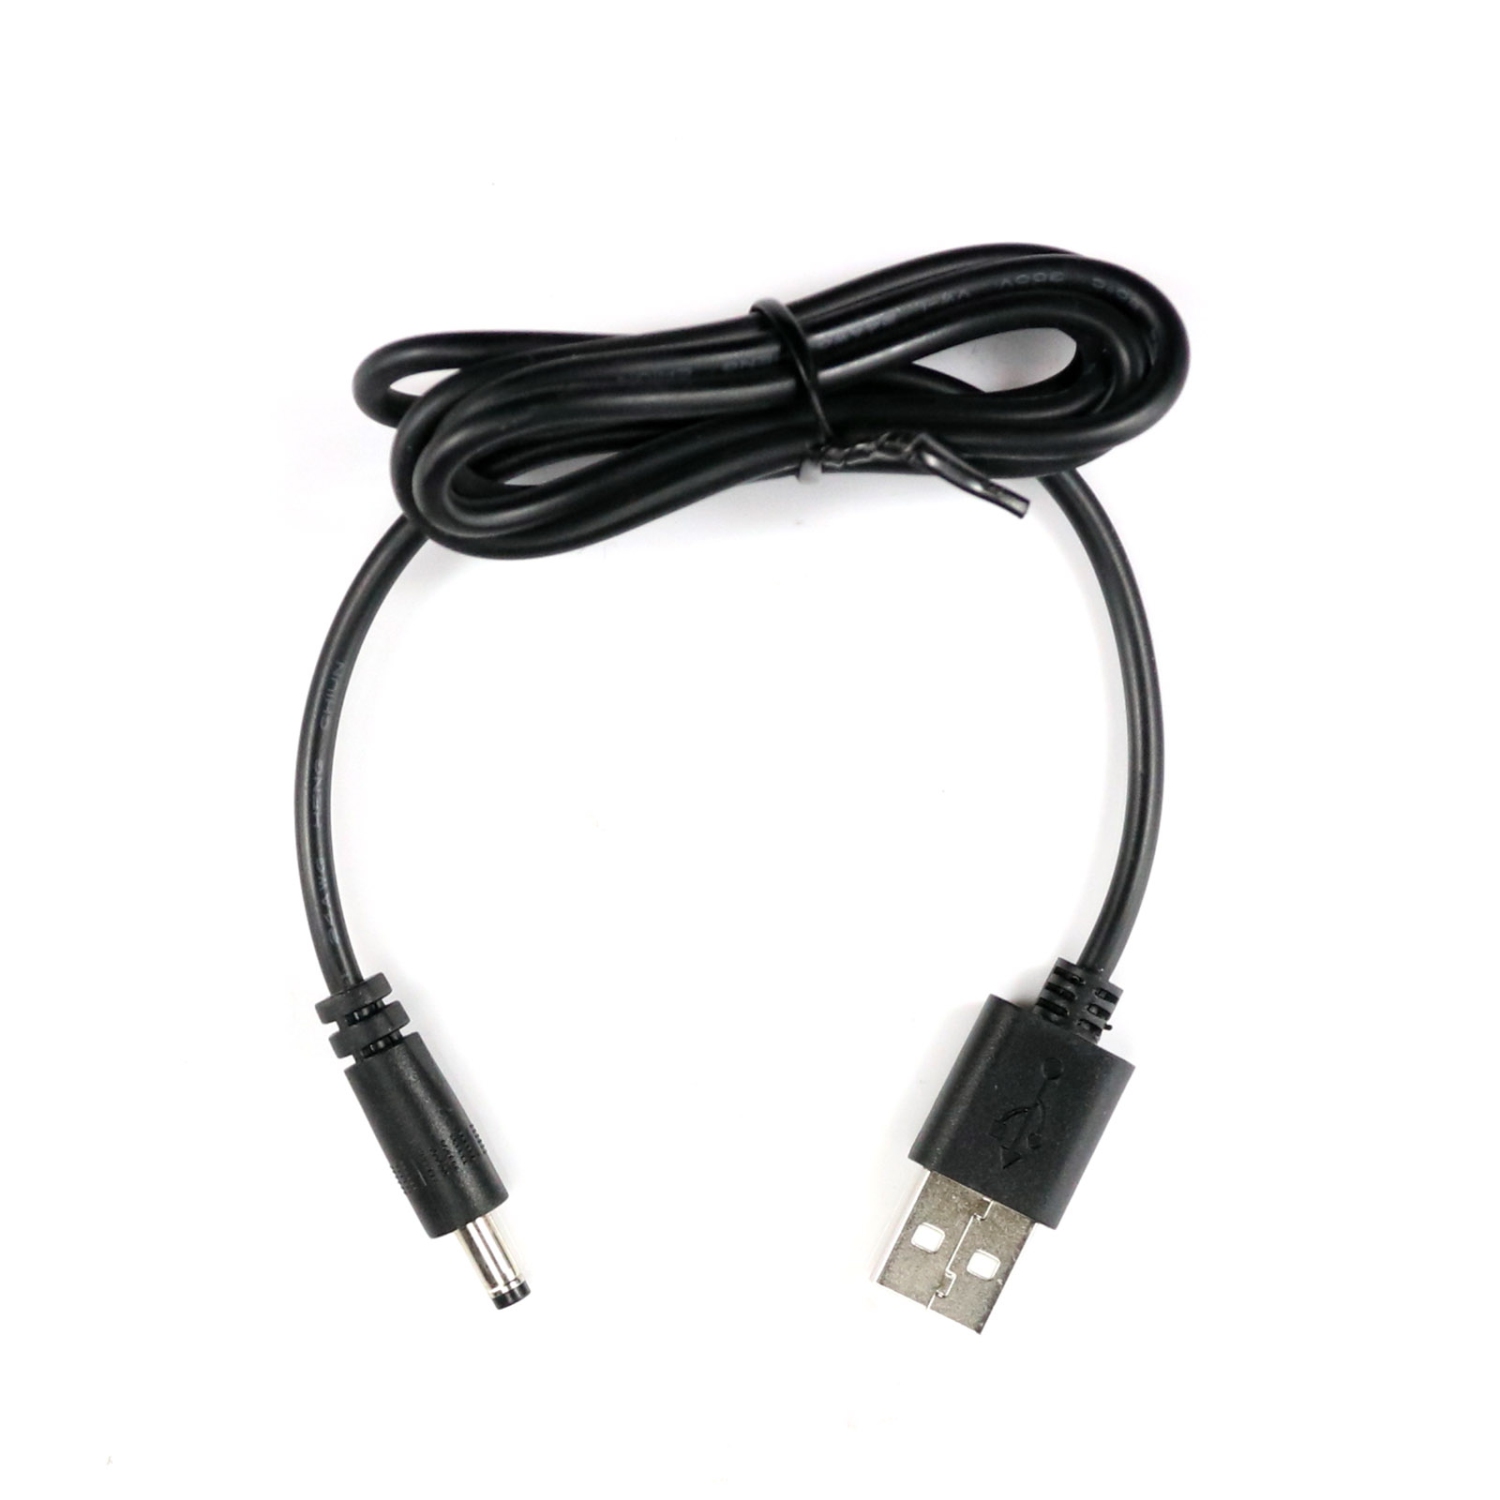 OEM USB Charger Cable for Propel Star Wars T-65 X-Wing TIE X1 74-Z Bike Drone Battery Charger- Refurbished Excellent